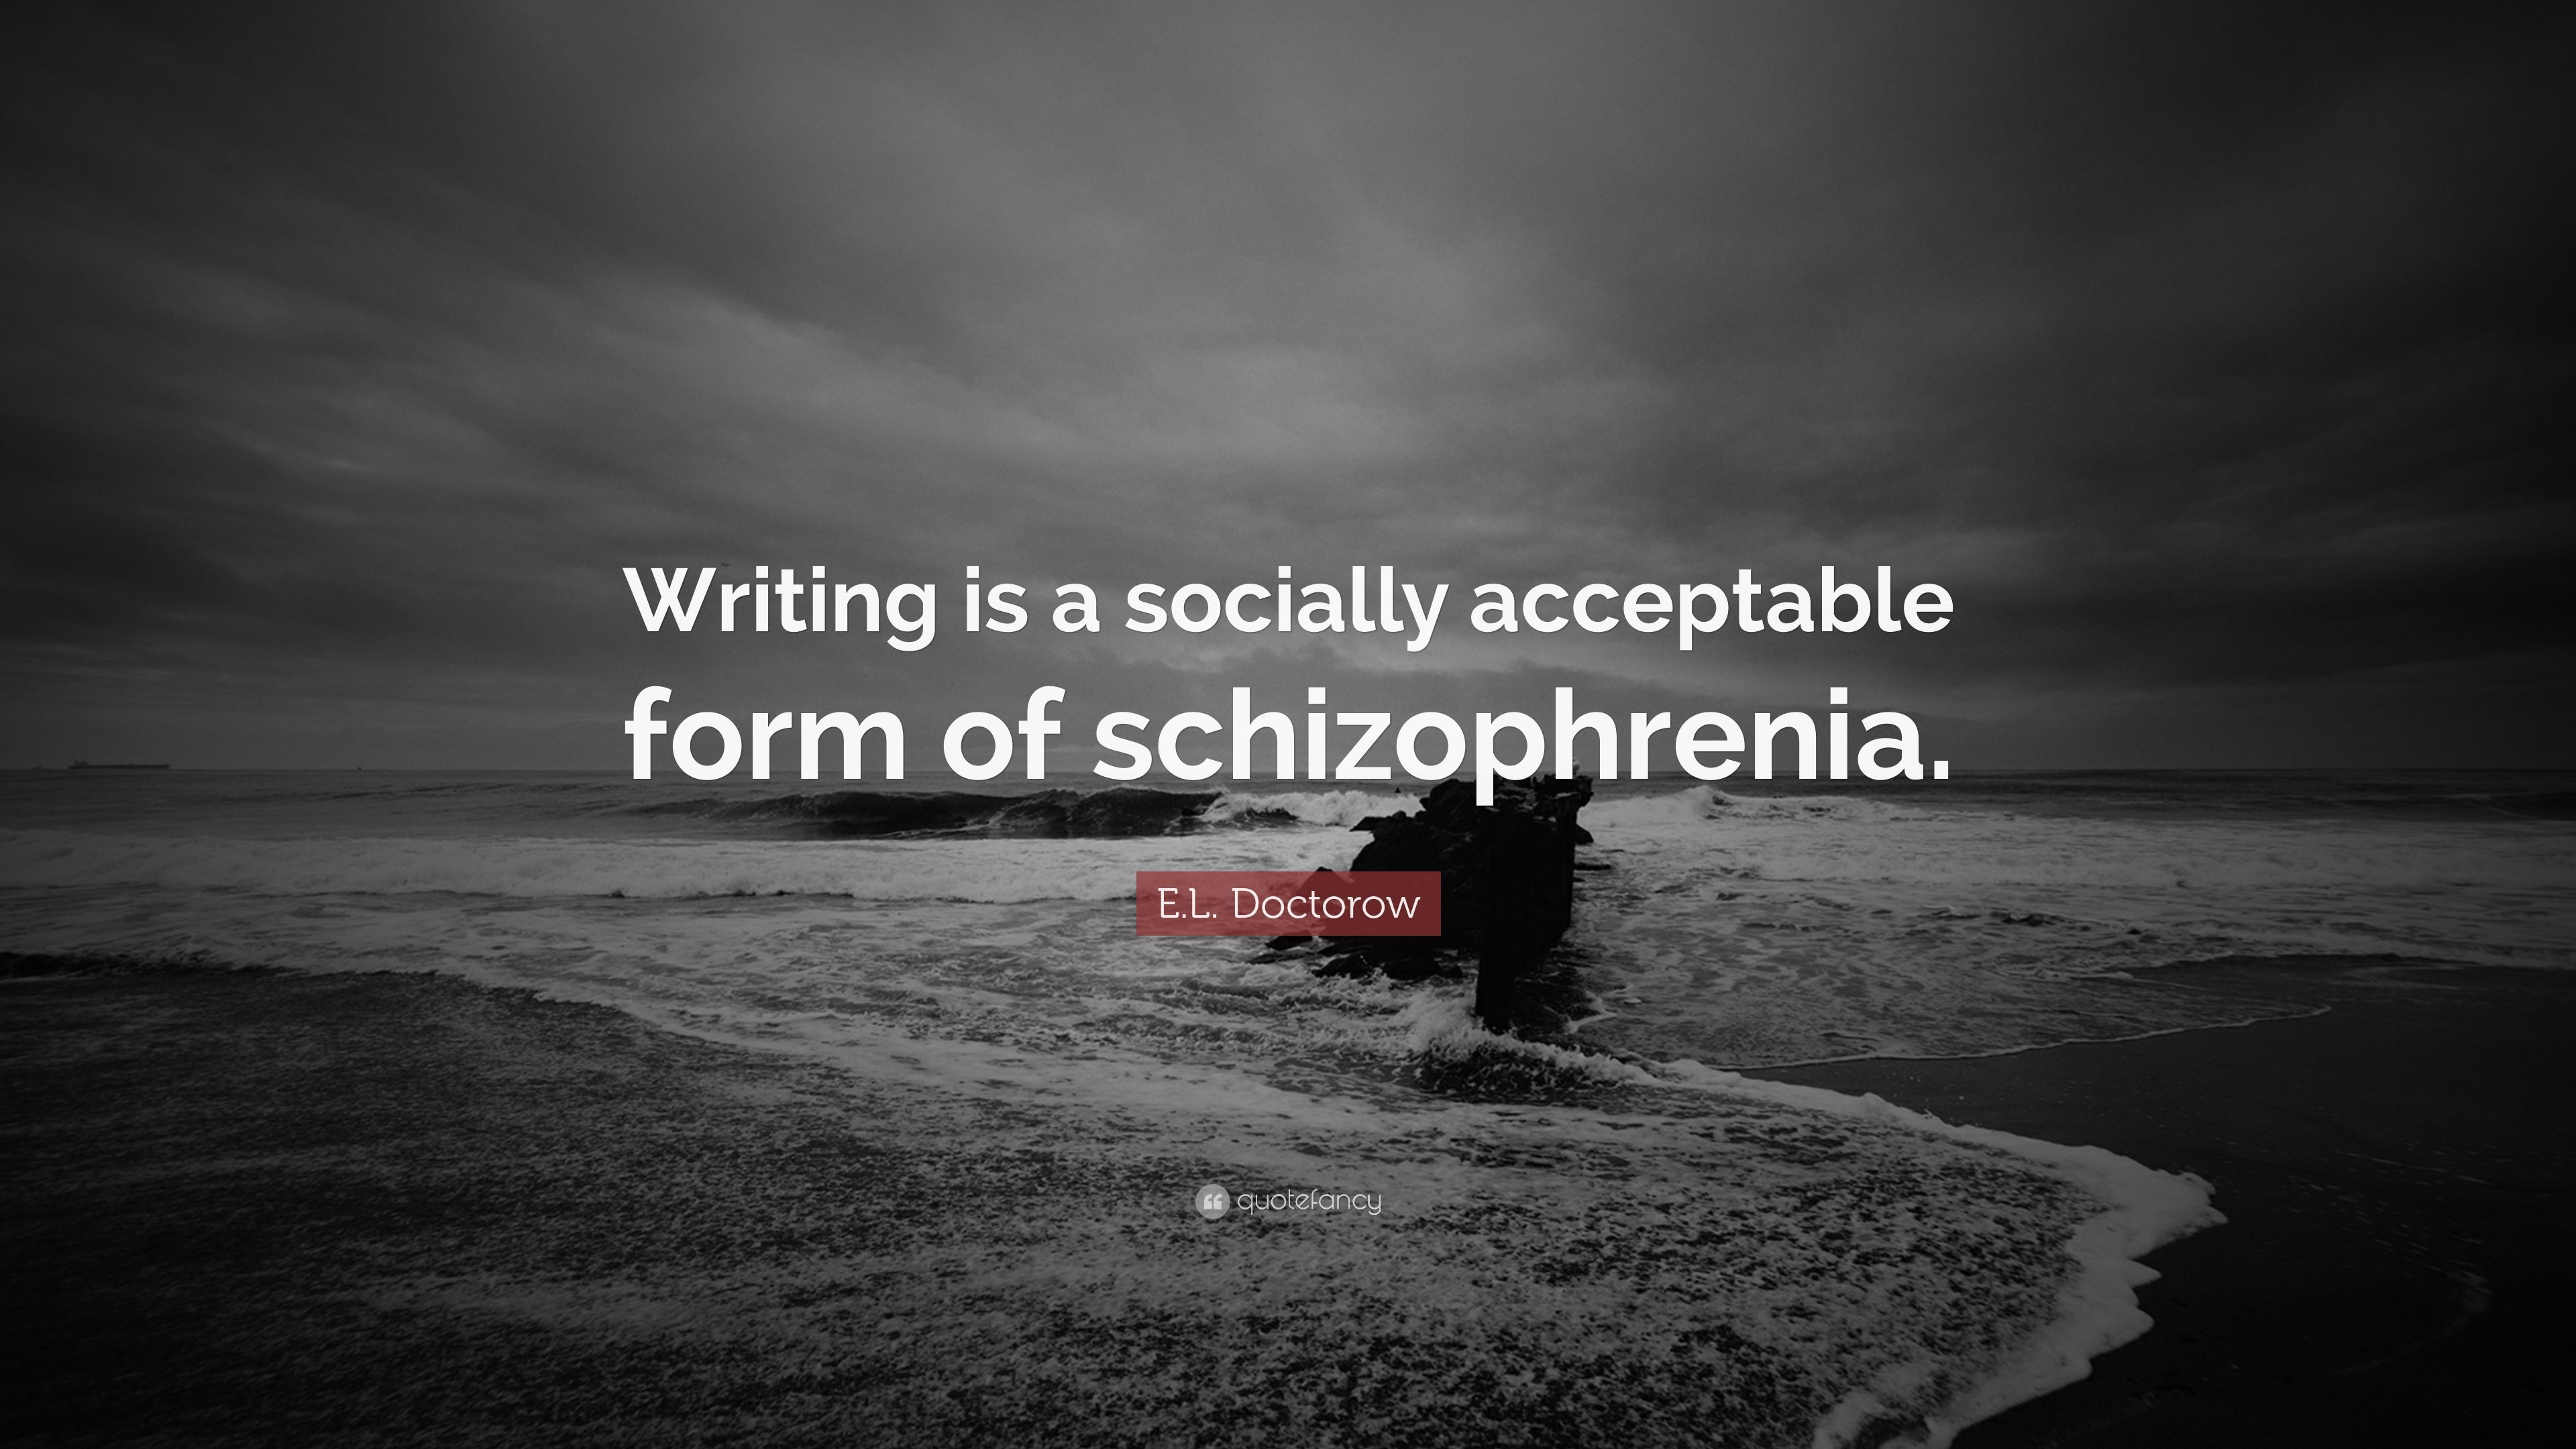 E. L. Doctorow Quote: “Writing is a socially acceptable form of schizophrenia.” (17 wallpaper)